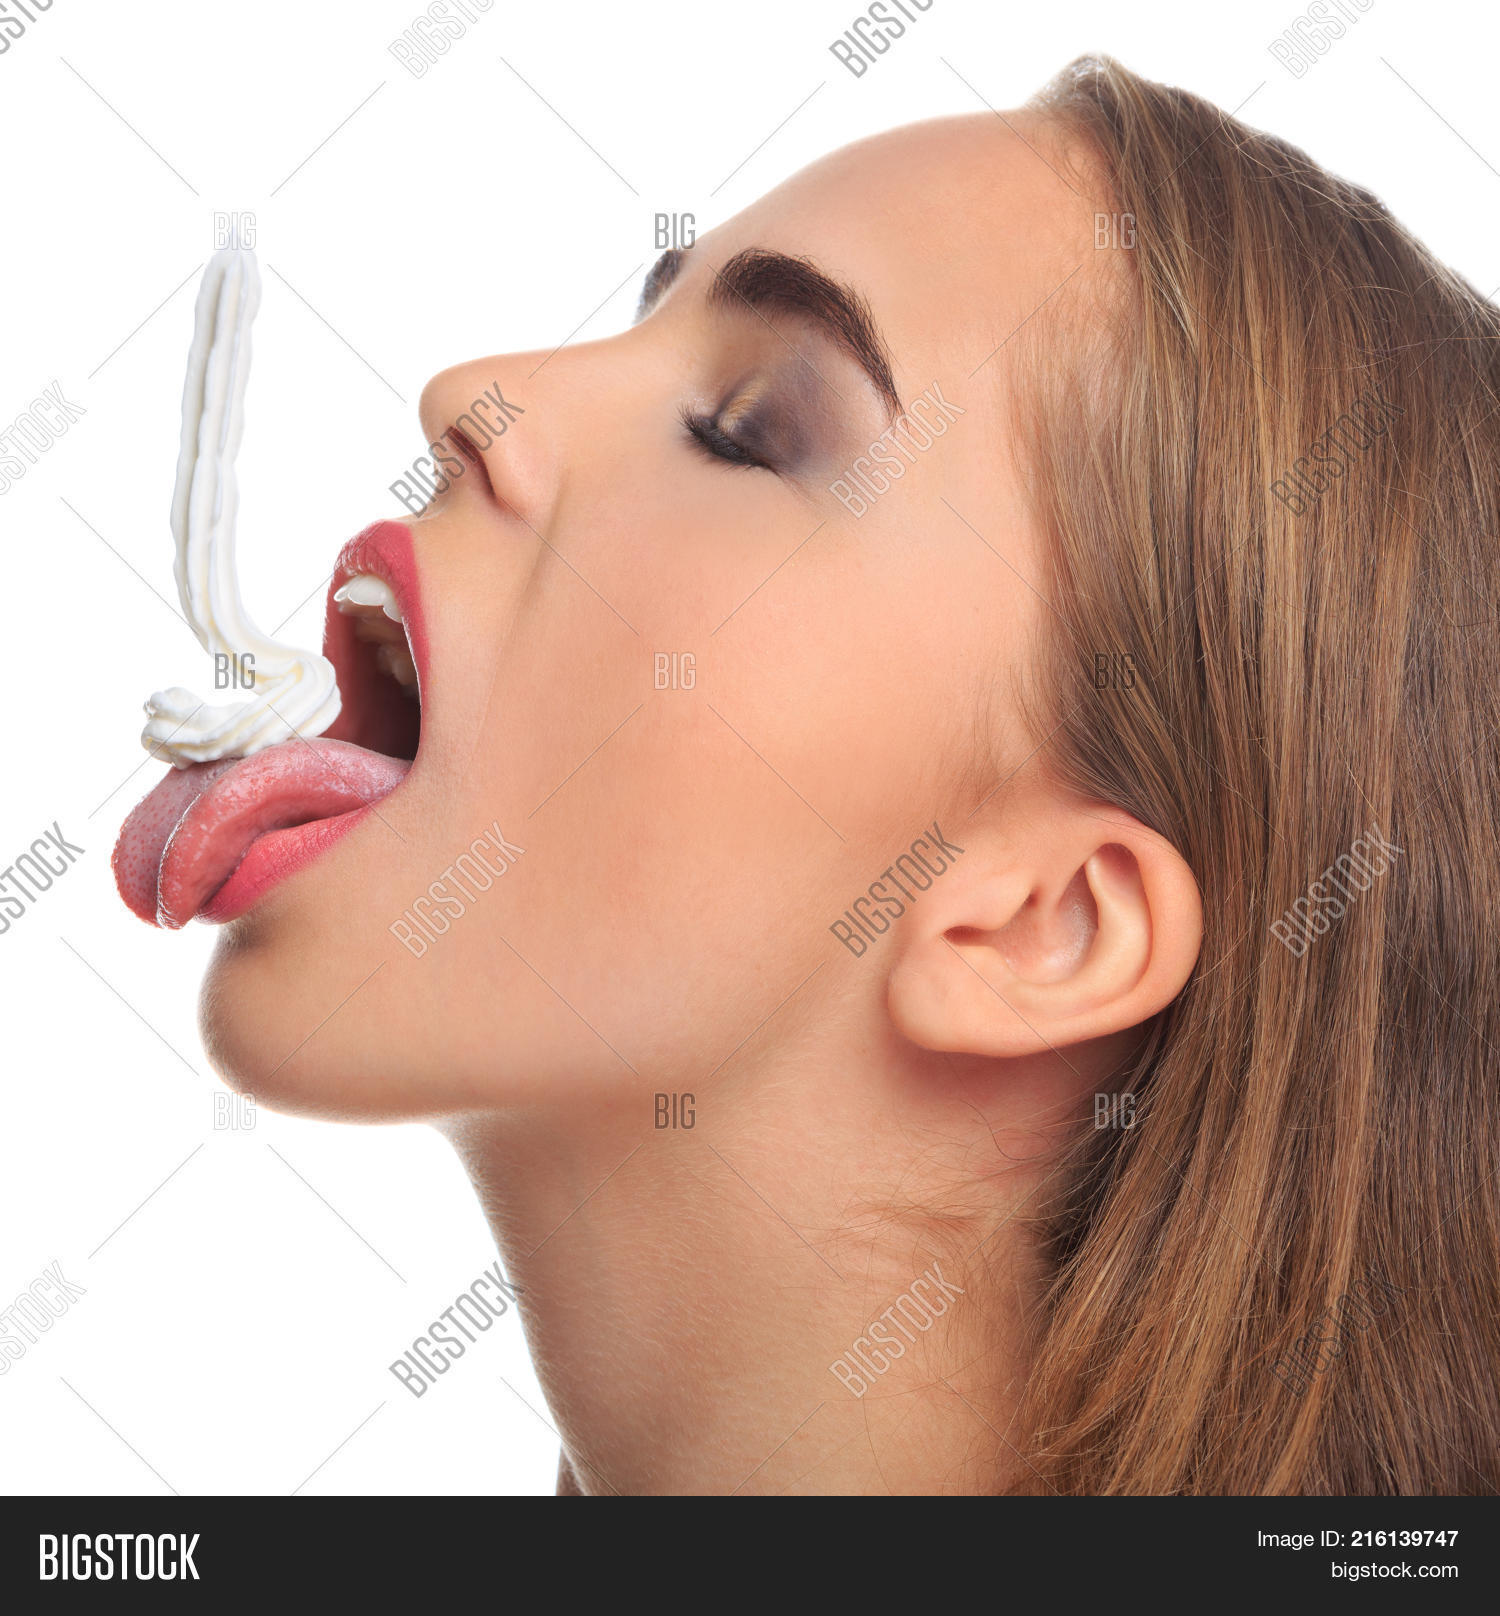 dawn witmer recommends Mouth Open Tongue Out Pics